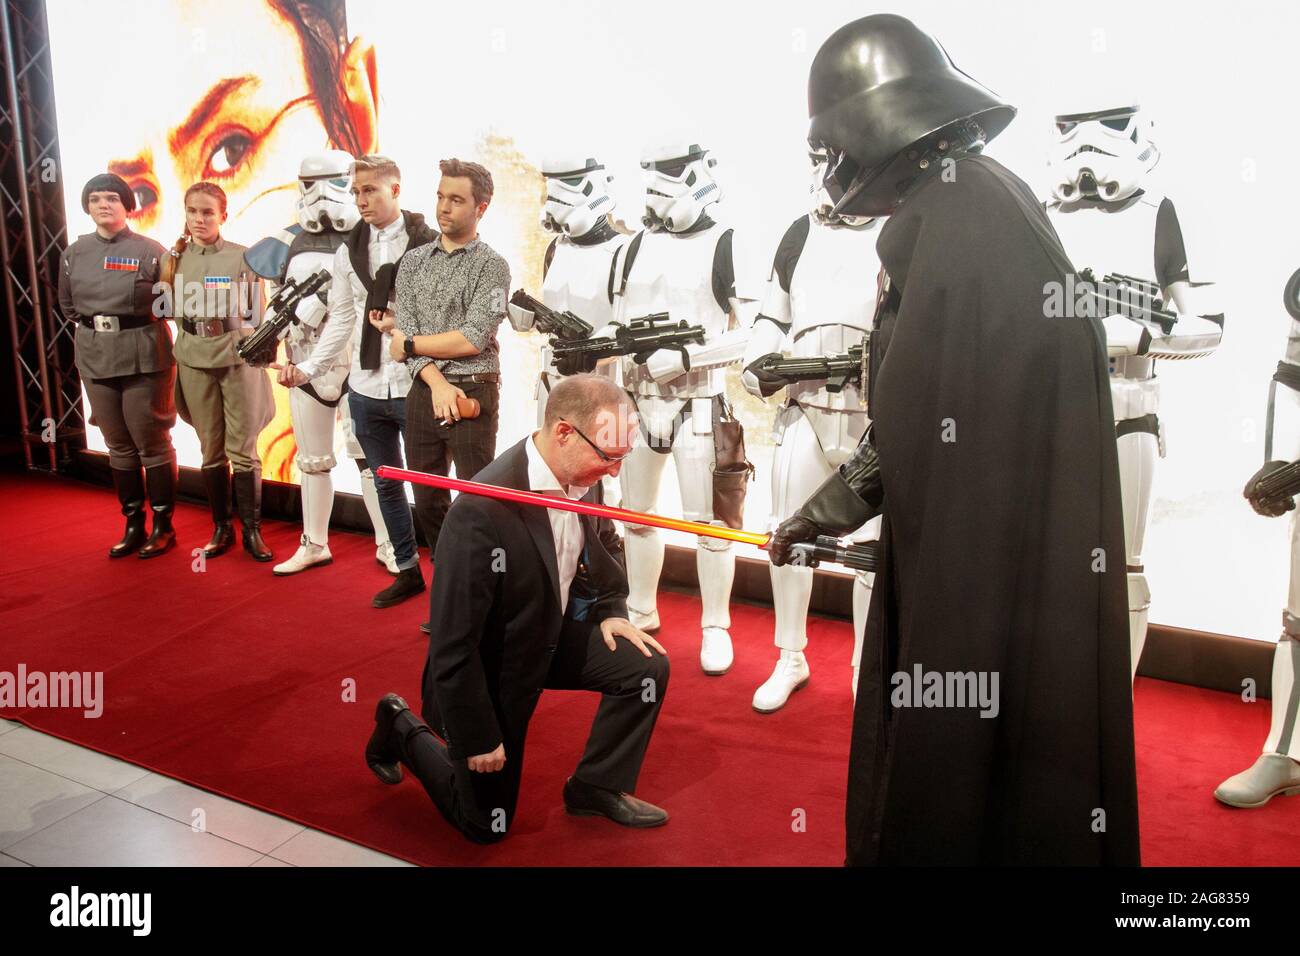 Budapest, Hungary. 17th Dec, 2019. People take part in a VIP screening of 'Star Wars: The Rise of Skywalker' in Budapest, Hungary, Dec. 17, 2019. Credit: Attila Volgyi/Xinhua/Alamy Live News Stock Photo